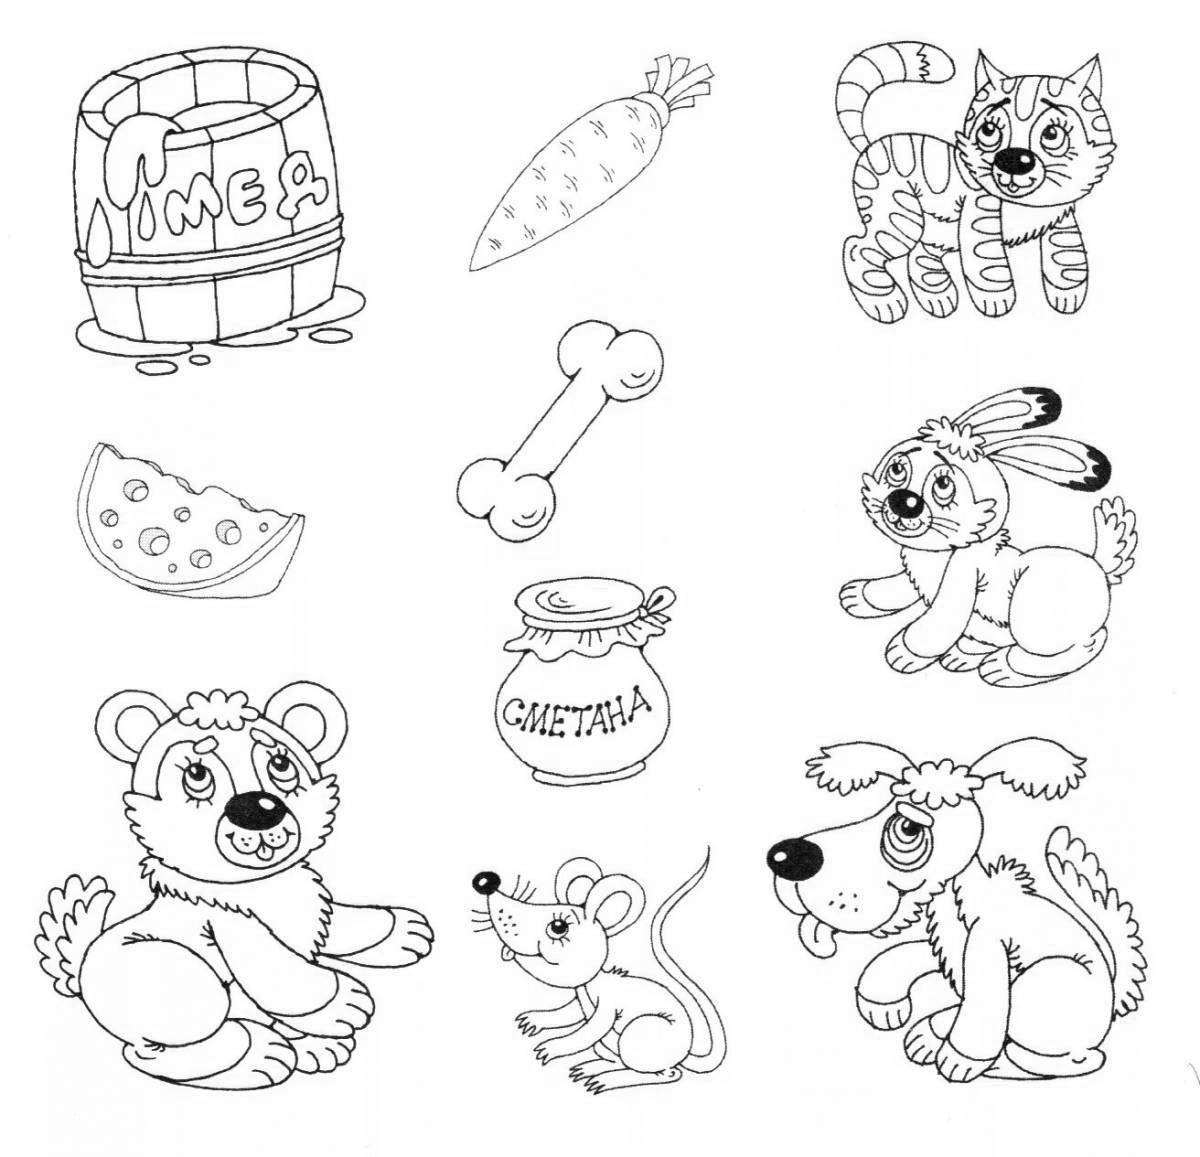 Entertaining coloring book for kids